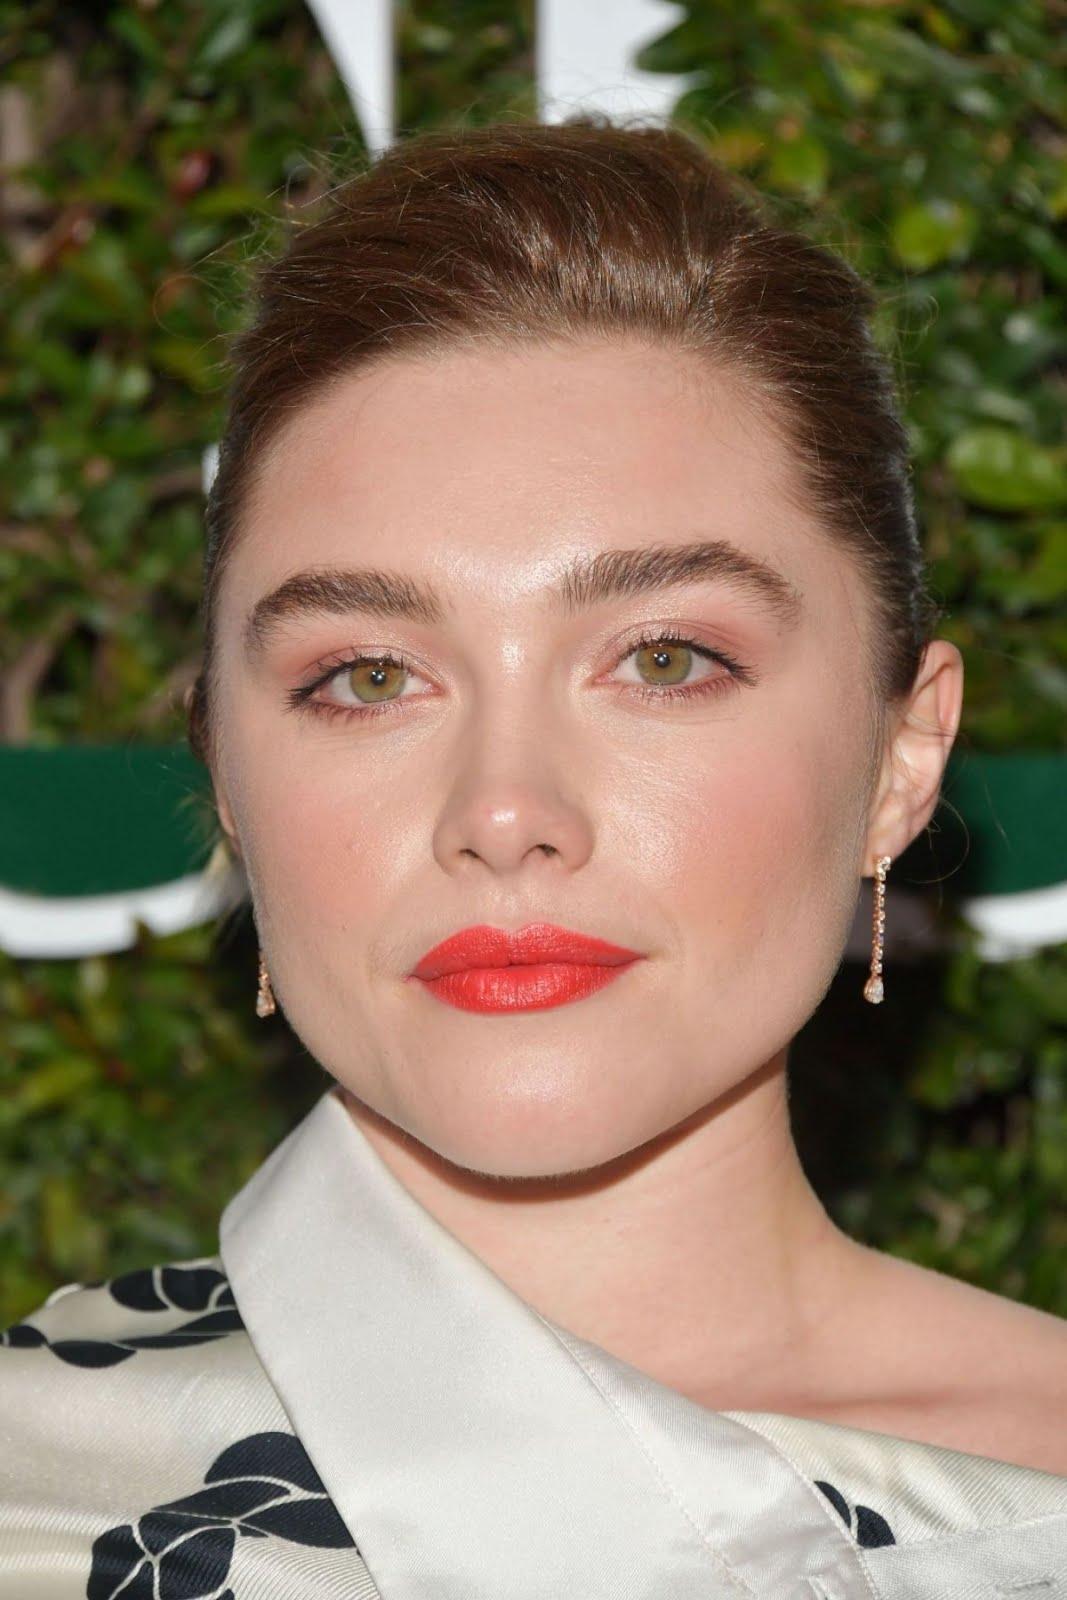 Florence Pugh At Teen Vogues 2019 young Hollywood Party Held At